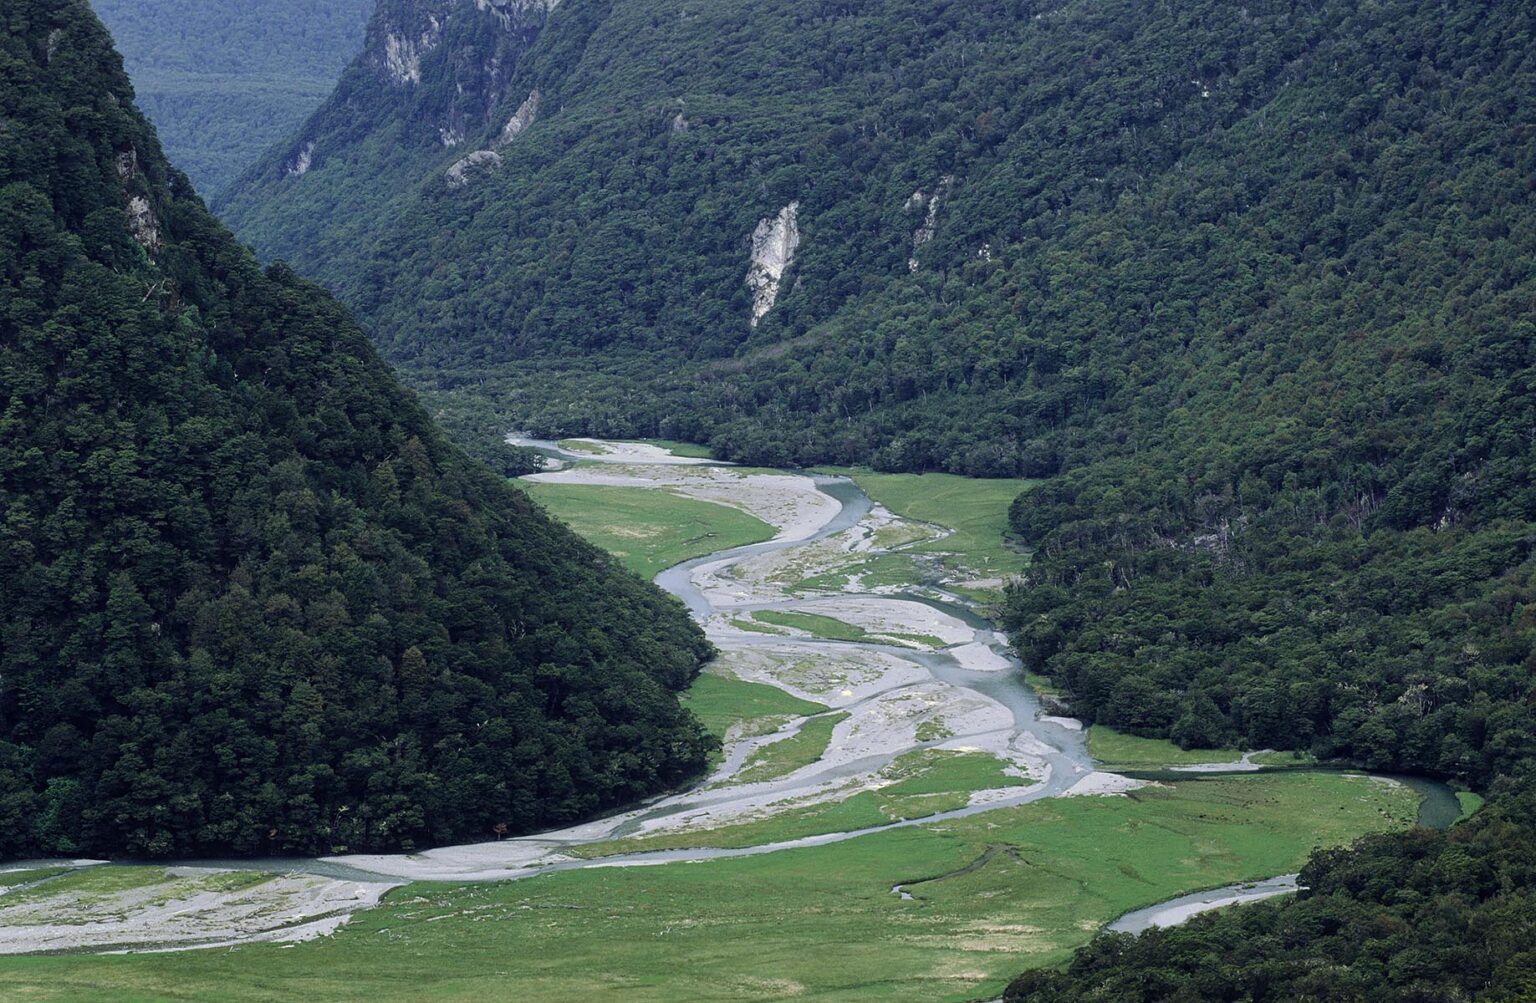 The ROUTEBURN RIVER VALLEY in MT ASPIRING NATIONAL PARK - SOUTH ISLAND